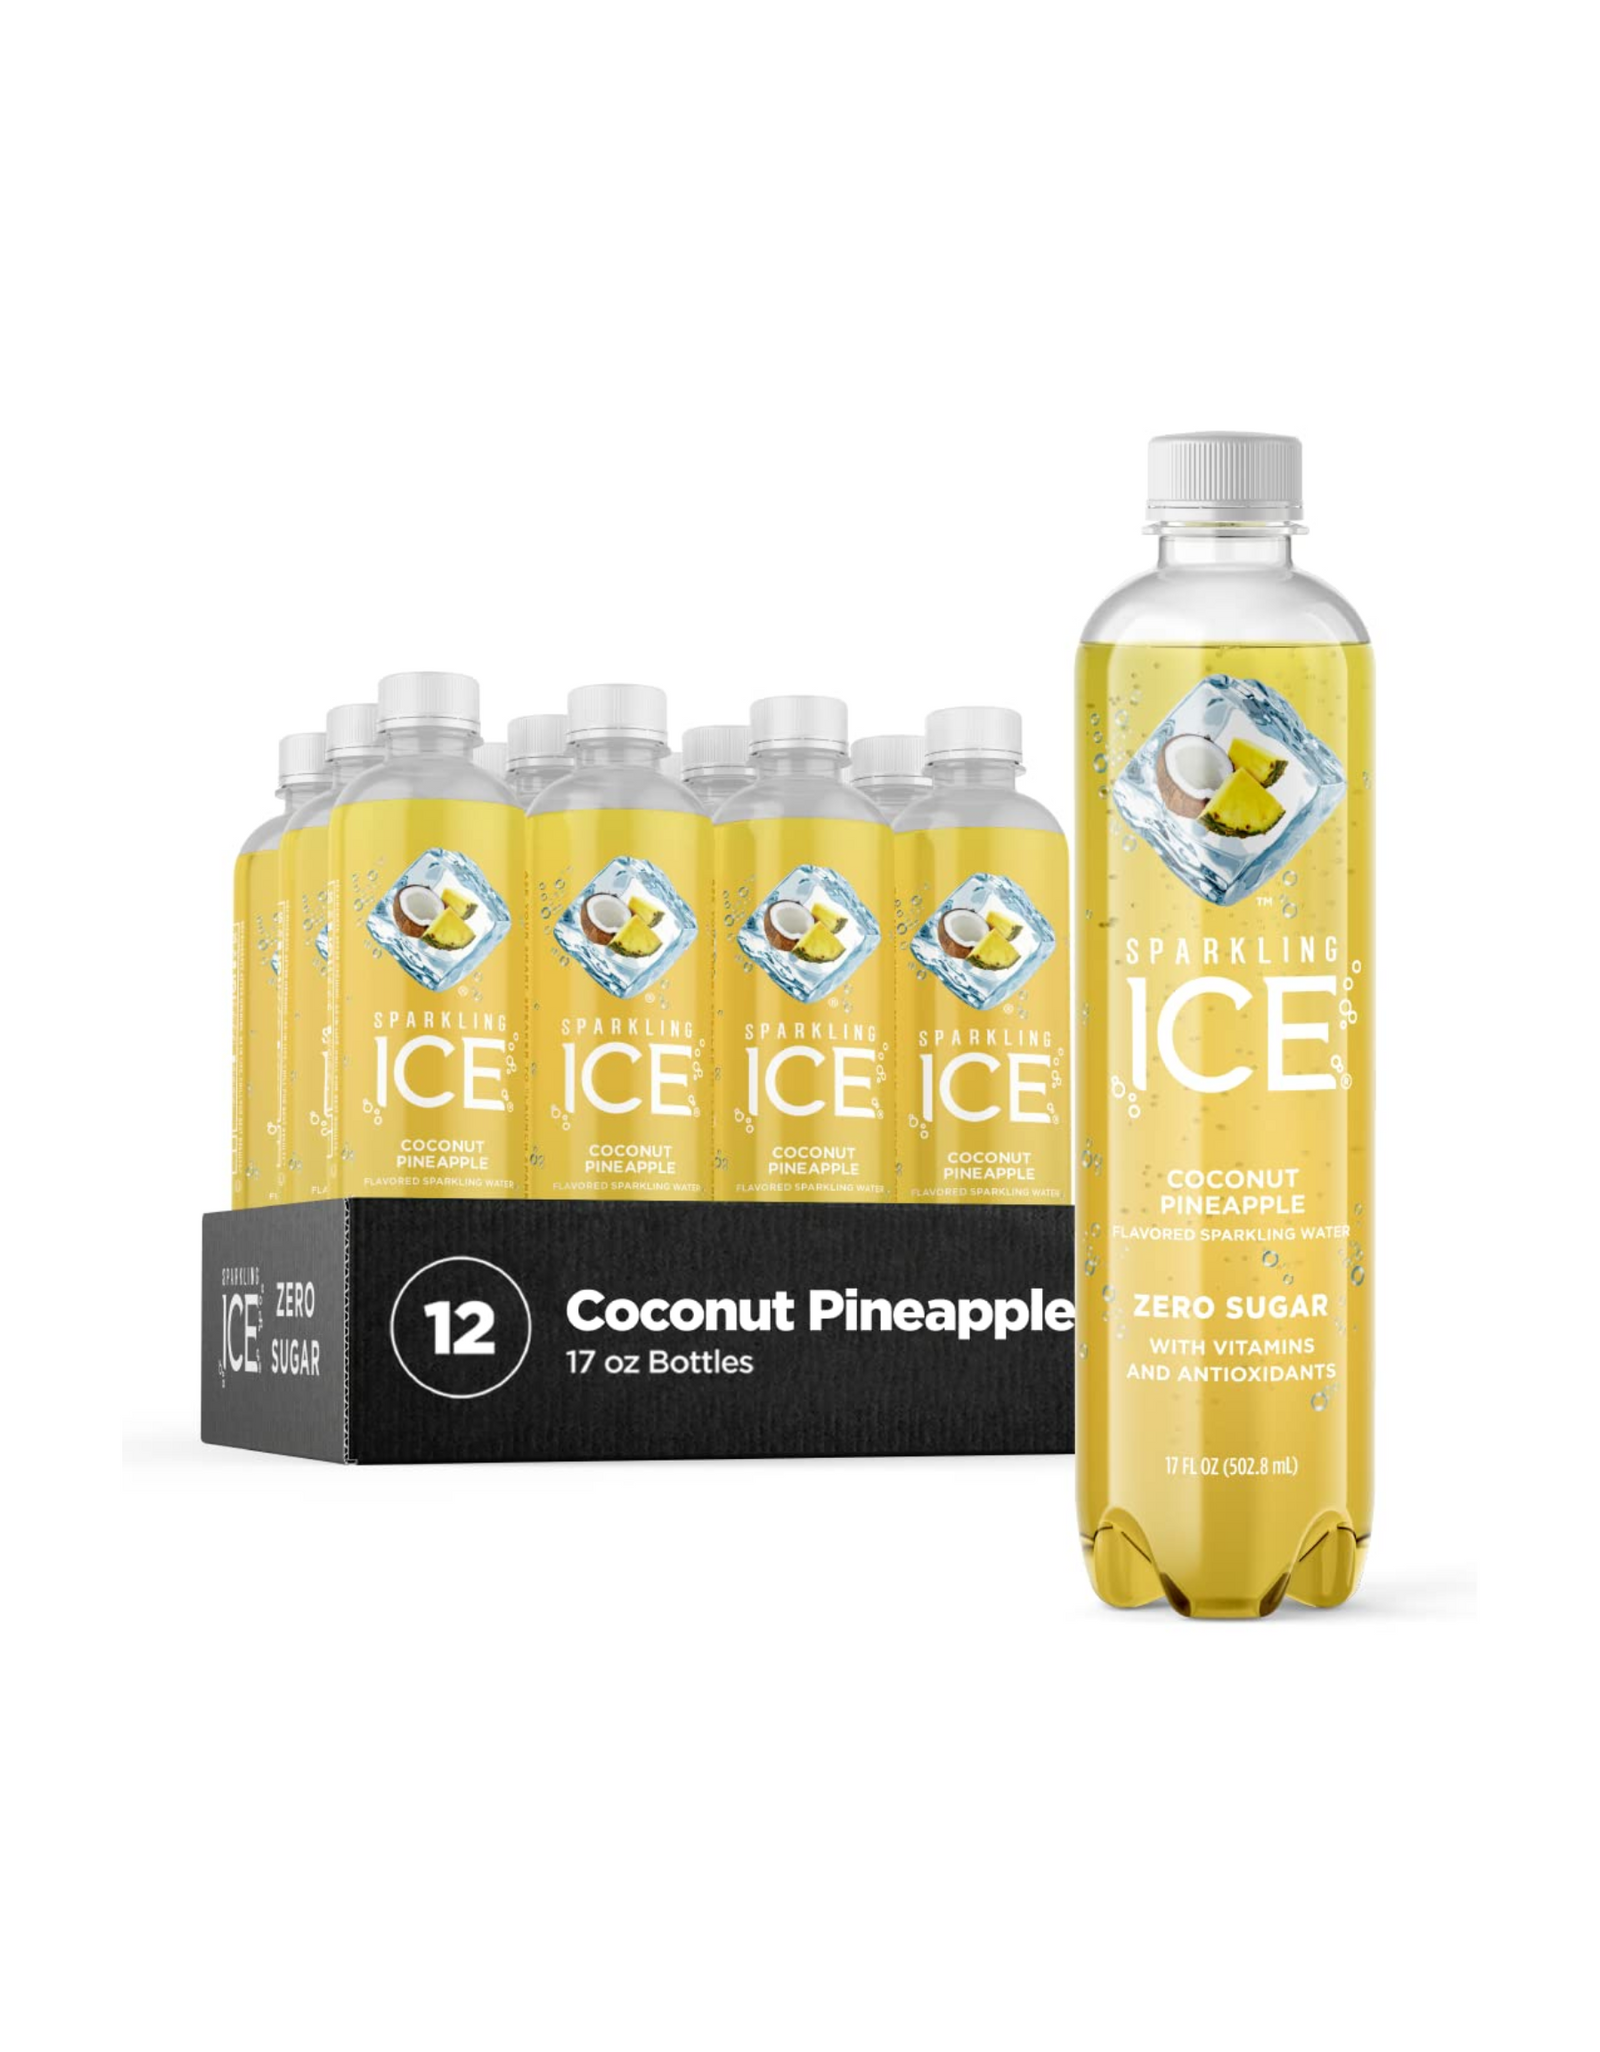 Sparkling Ice, Coconut Pineapple Sparkling Water, with Vitamins and Antioxidants, 17 fl oz (Pack of 12)